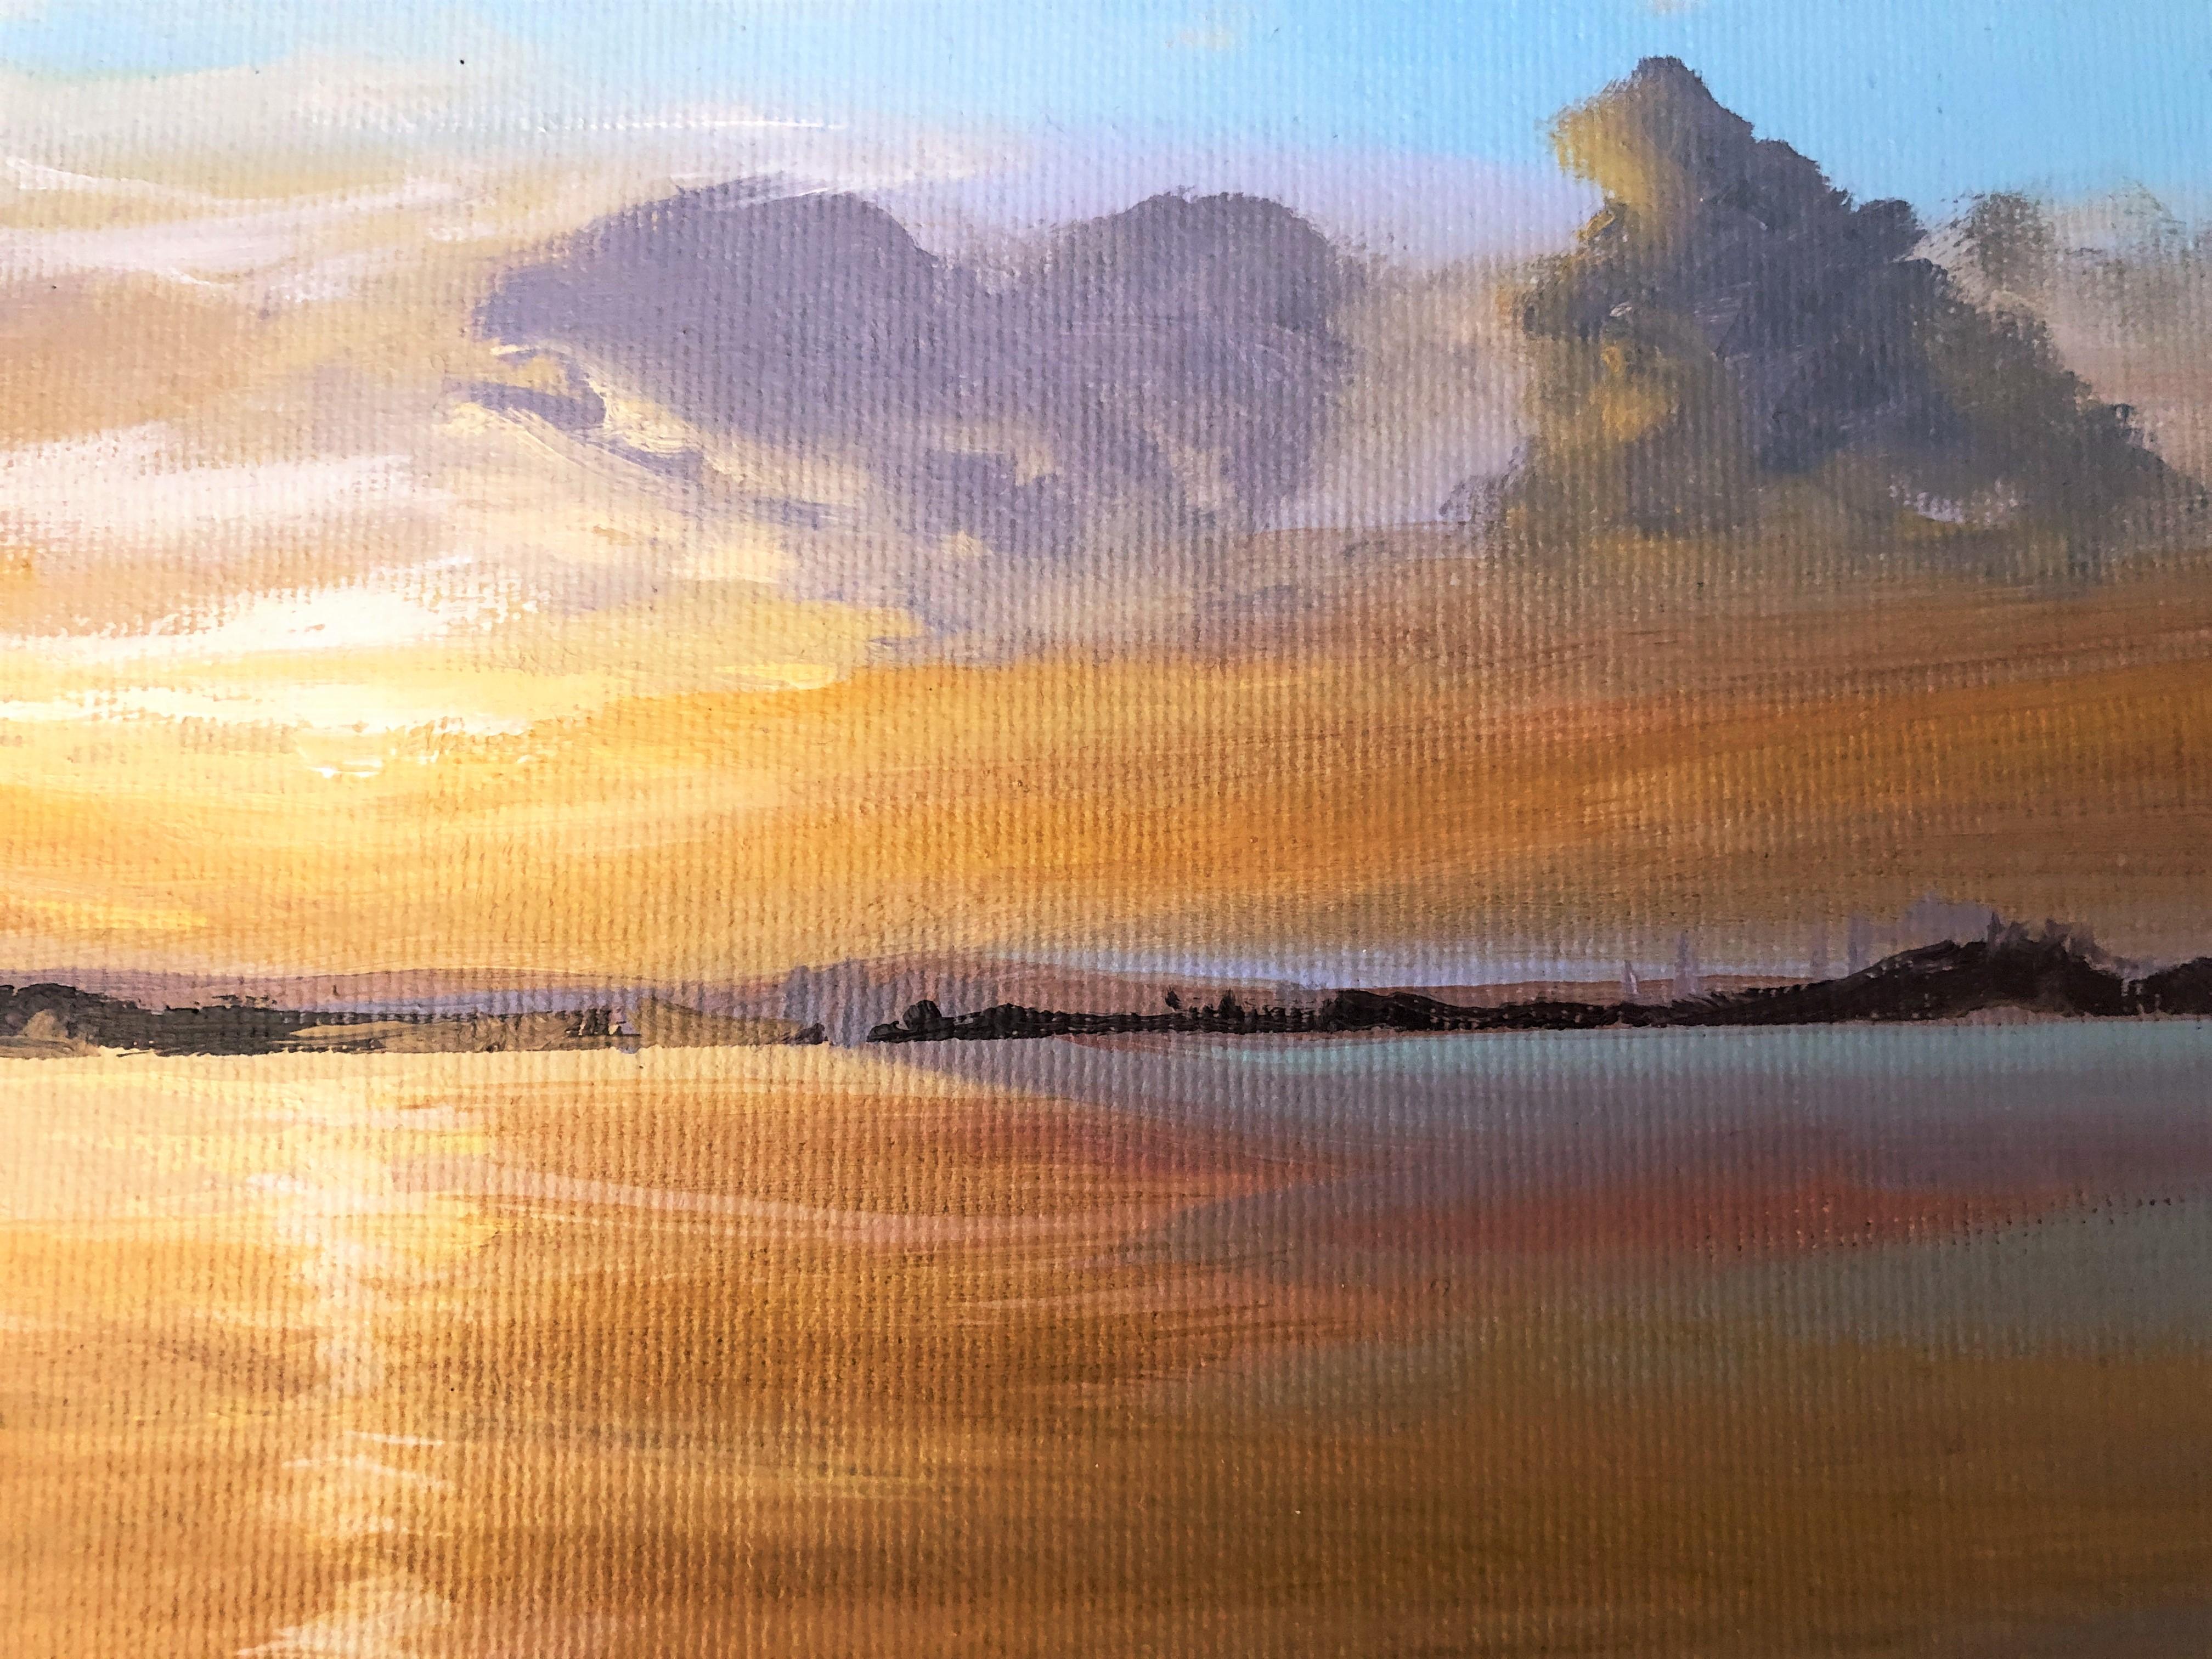 Sun in the Albufera of Valencia Spain oil on canvas painting landscape - Brown Landscape Painting by Alberto Biesok